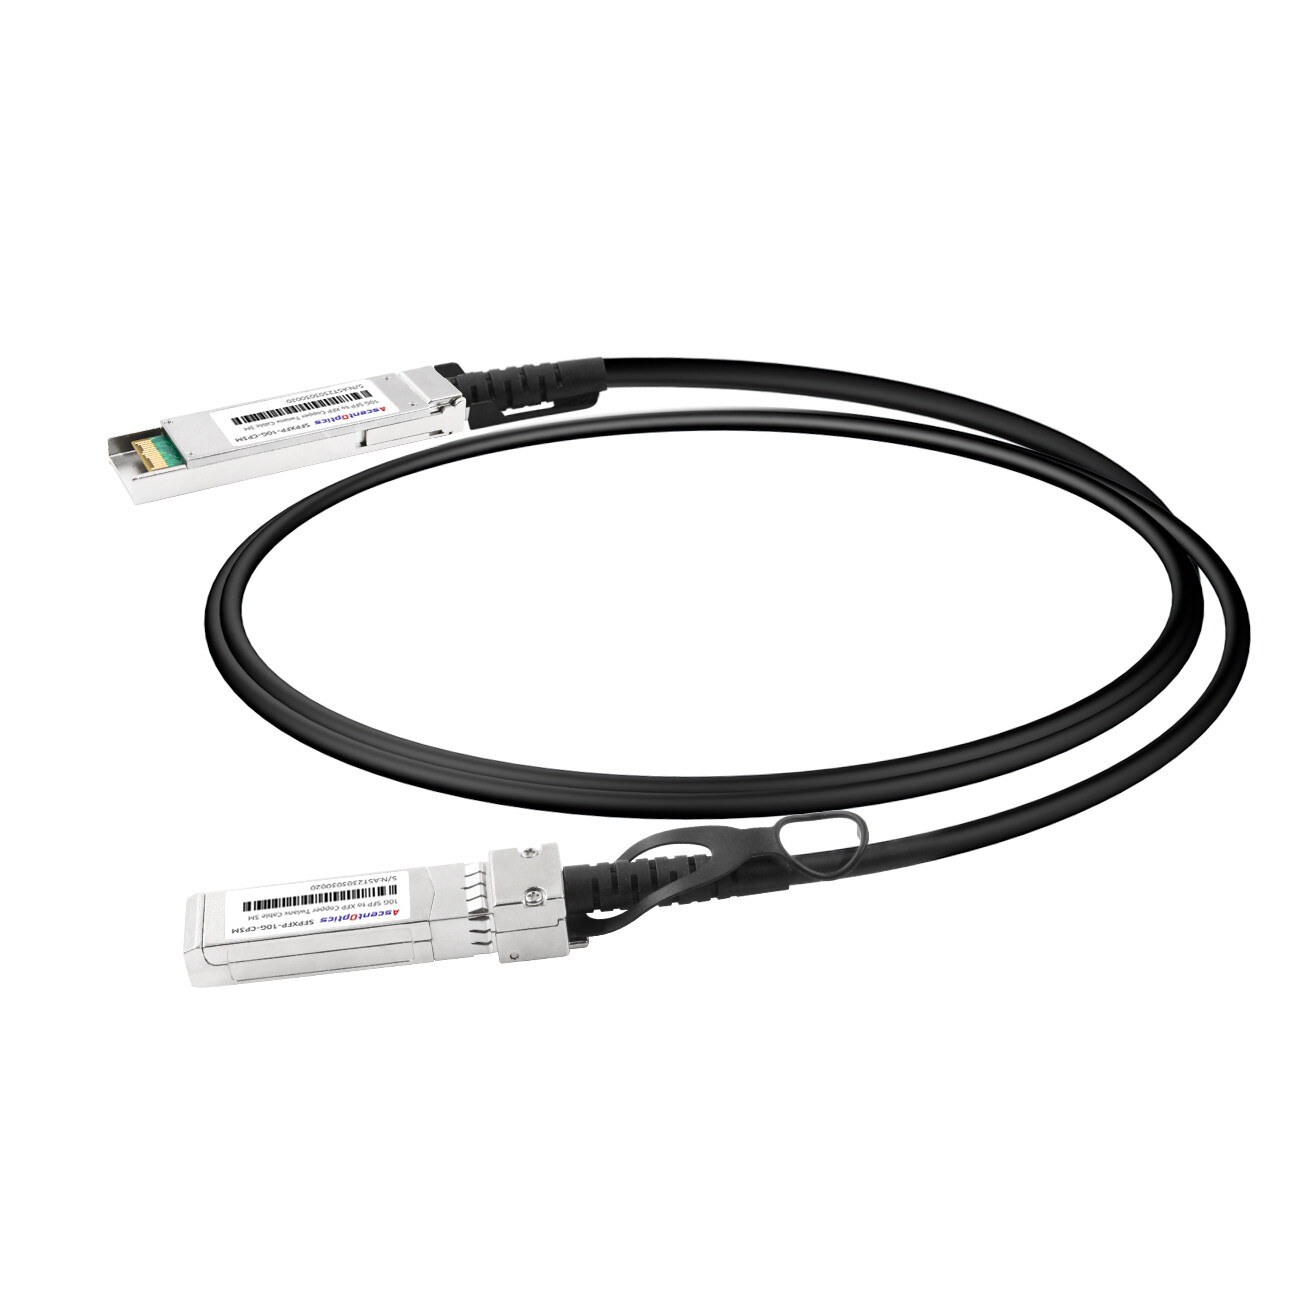 10G SFP+ to XFP Copper DAC Cable,3 Meters,Passive